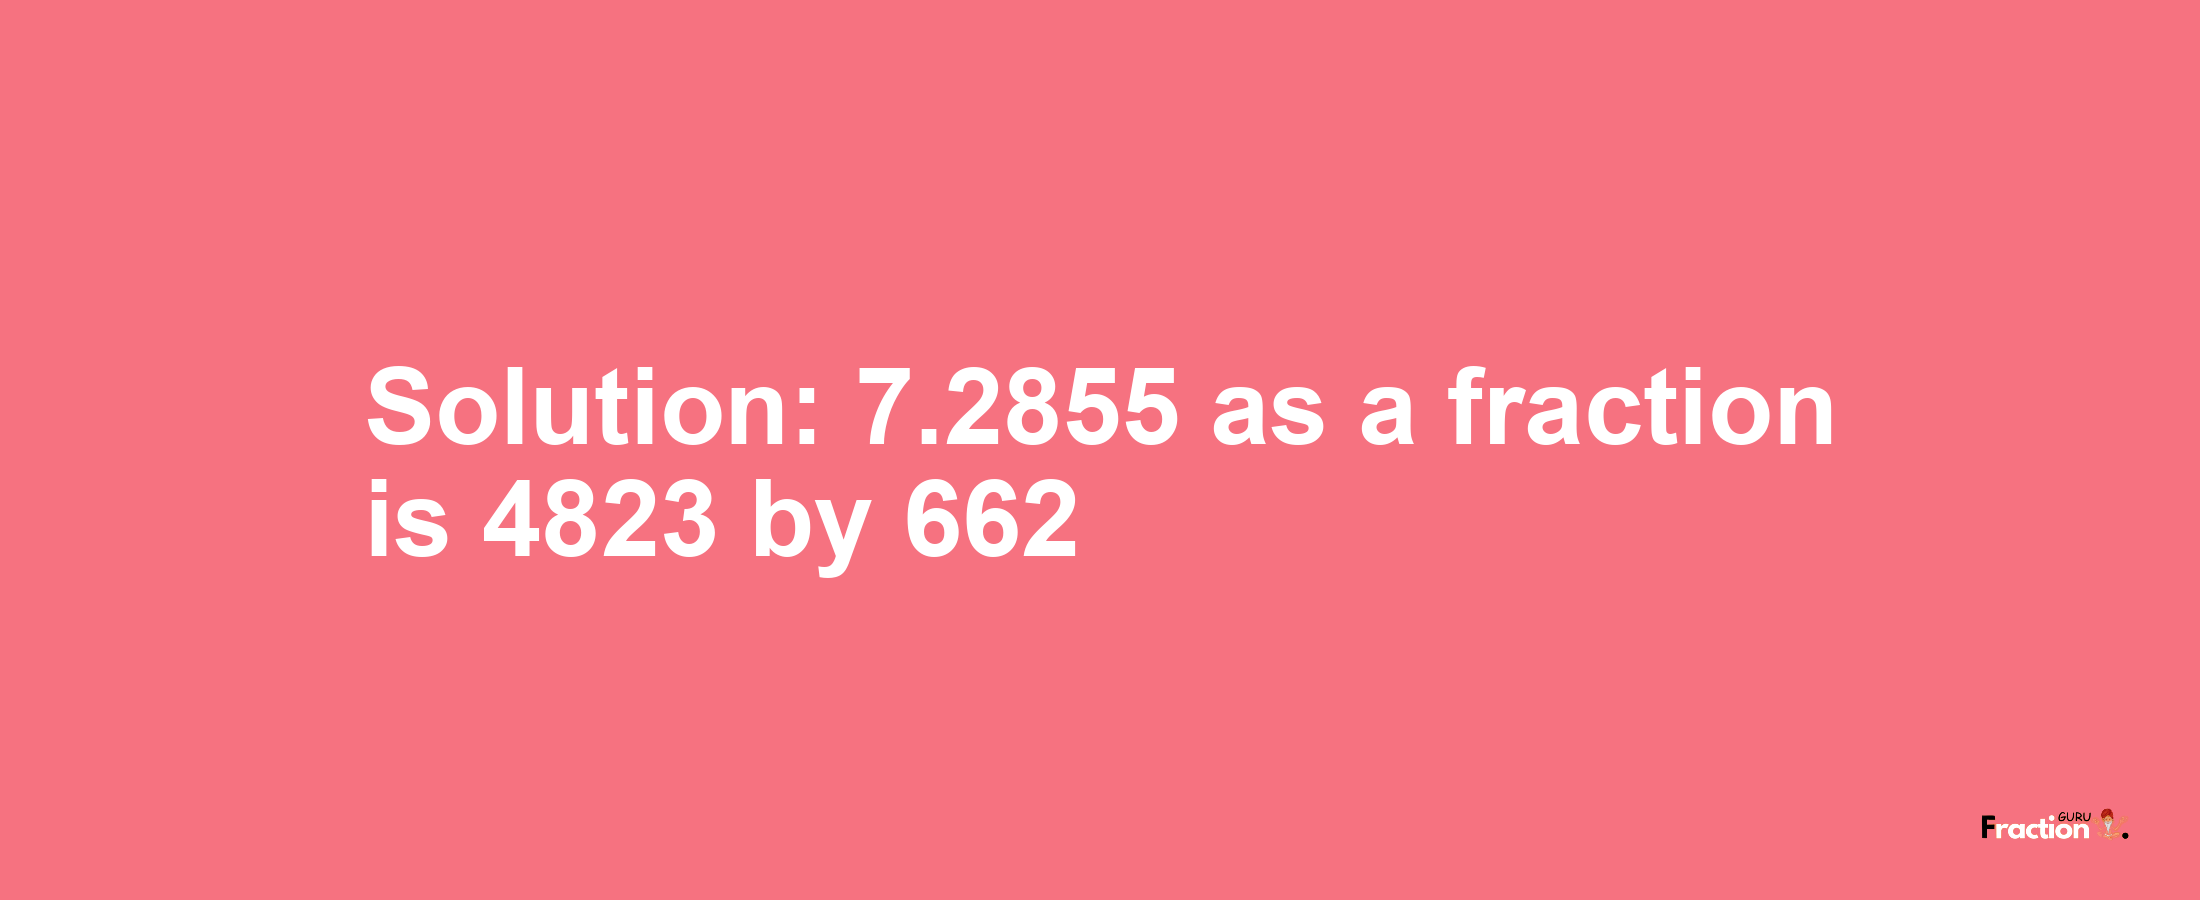 Solution:7.2855 as a fraction is 4823/662